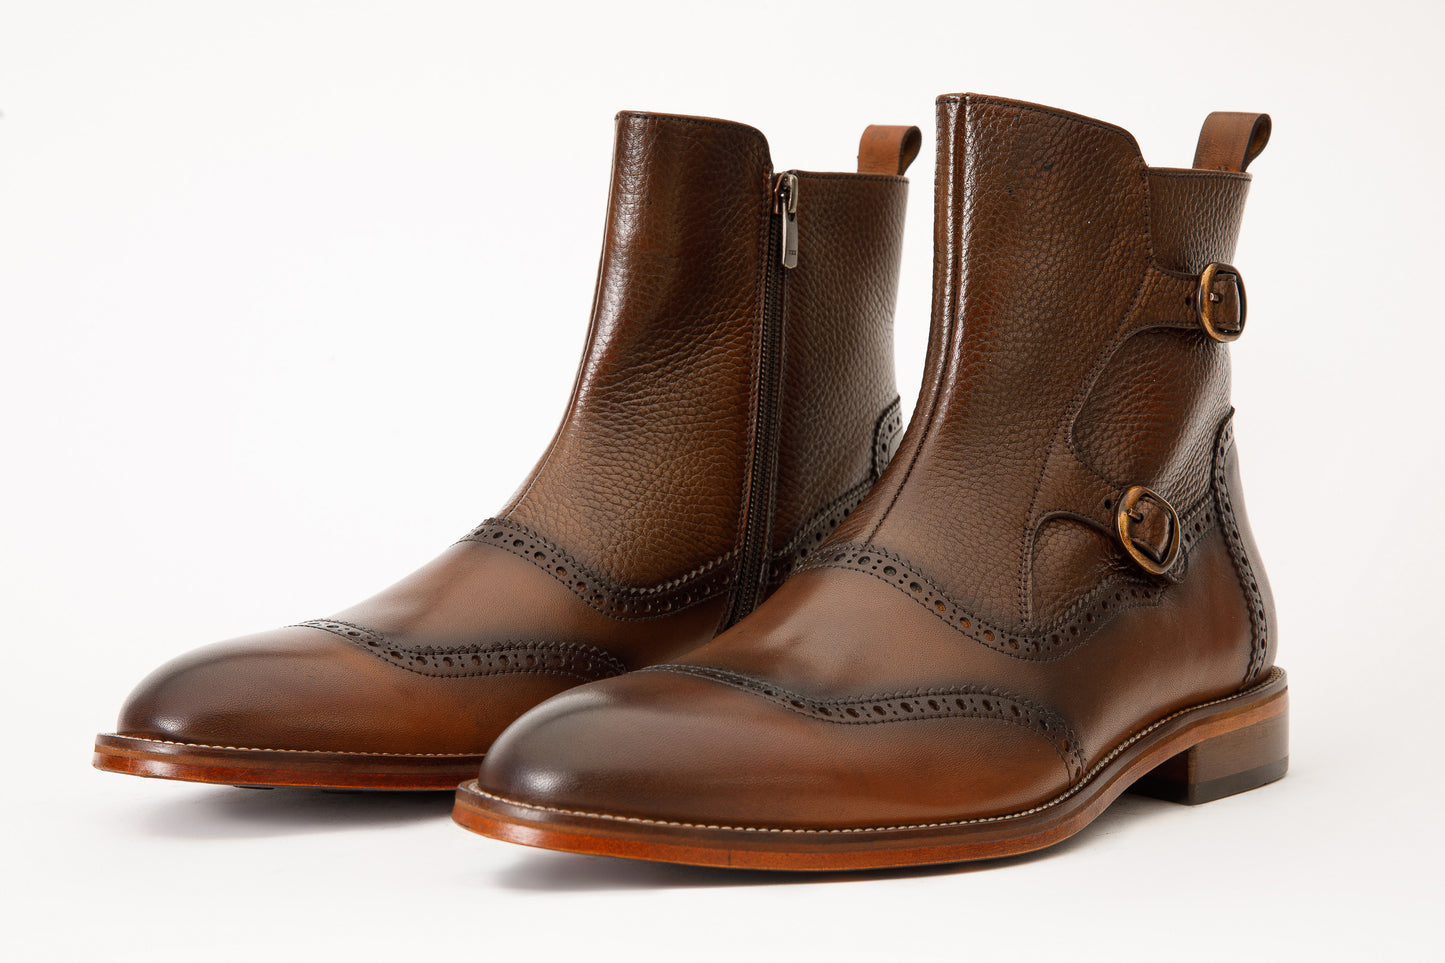 The Rand Brown Leather Double Buckle Brogue Men Boot with a Zipper